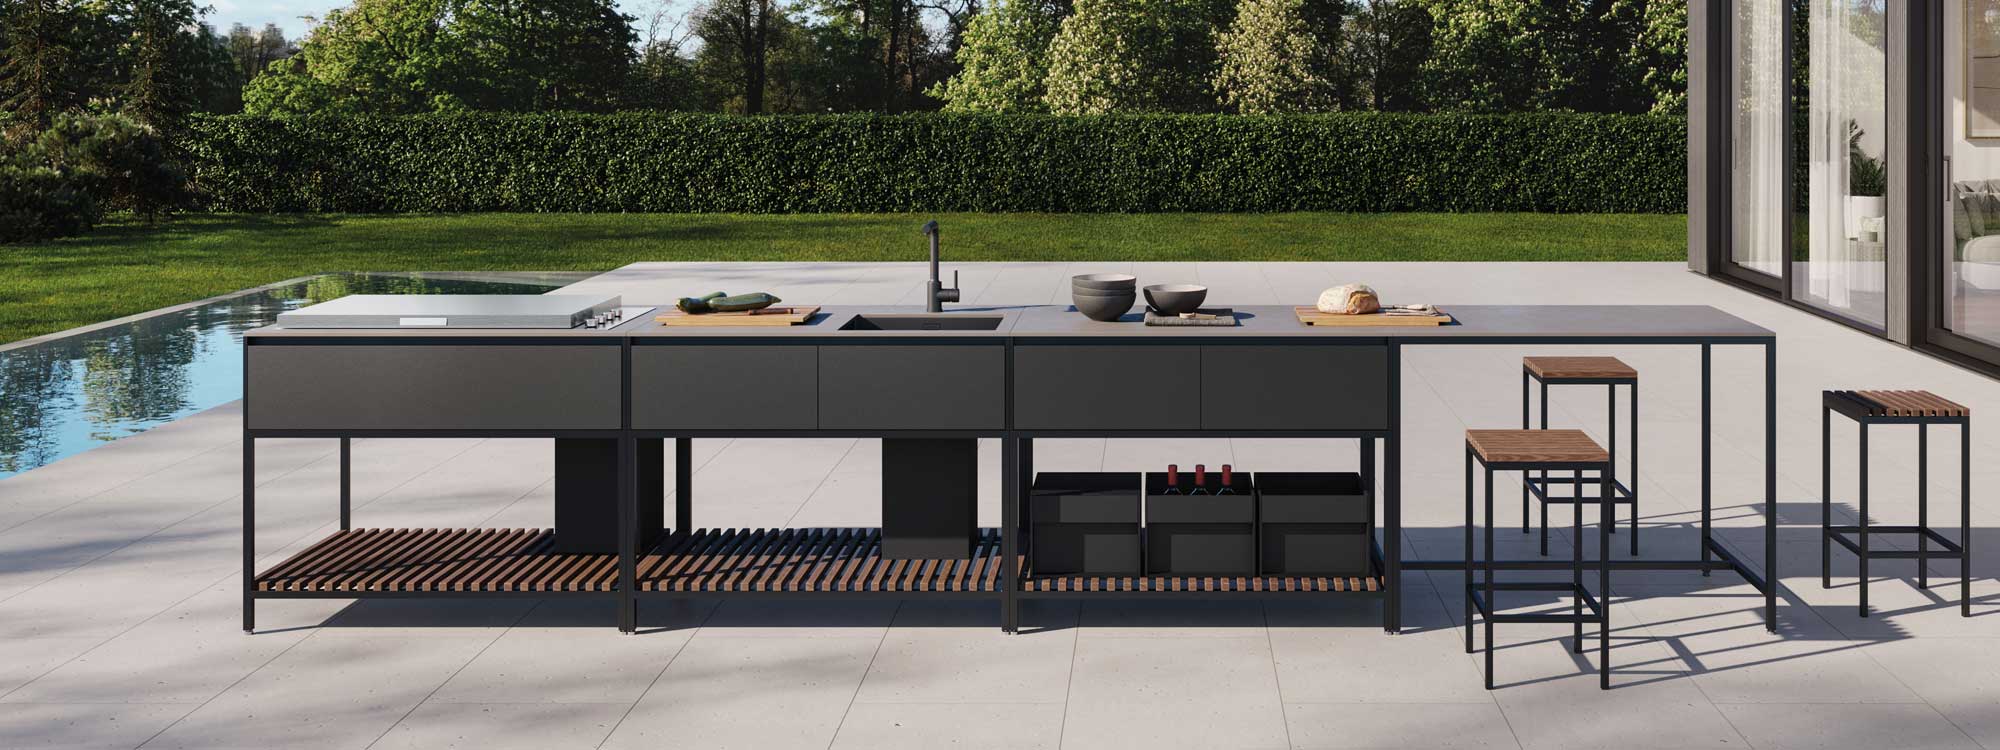 Image of Conmoto Ticin Frame modern garden kitchen island, shown on terrace next to linear water feature, with lawn and hedge in the background